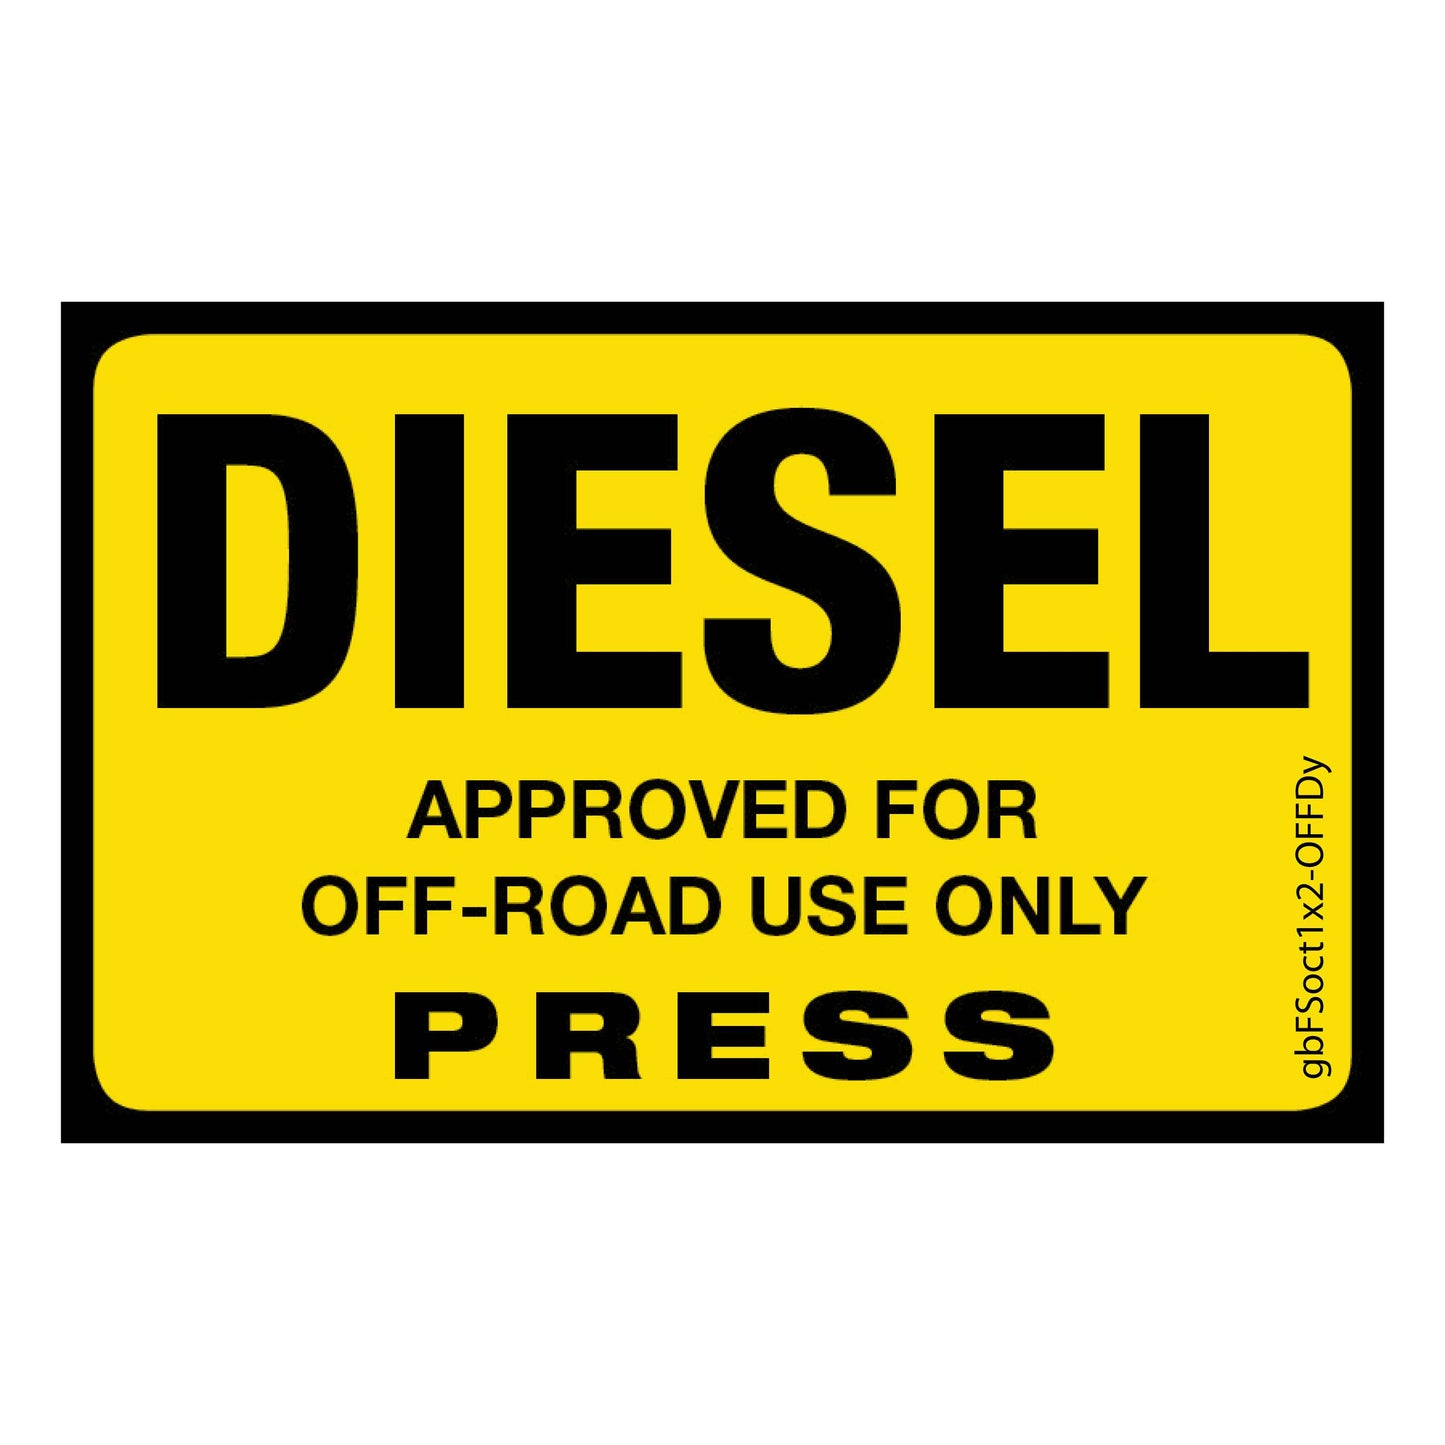 Diesel (Off Road) Press Octane Rating Decal, Yellow. 1 inch by 2 inches in size.